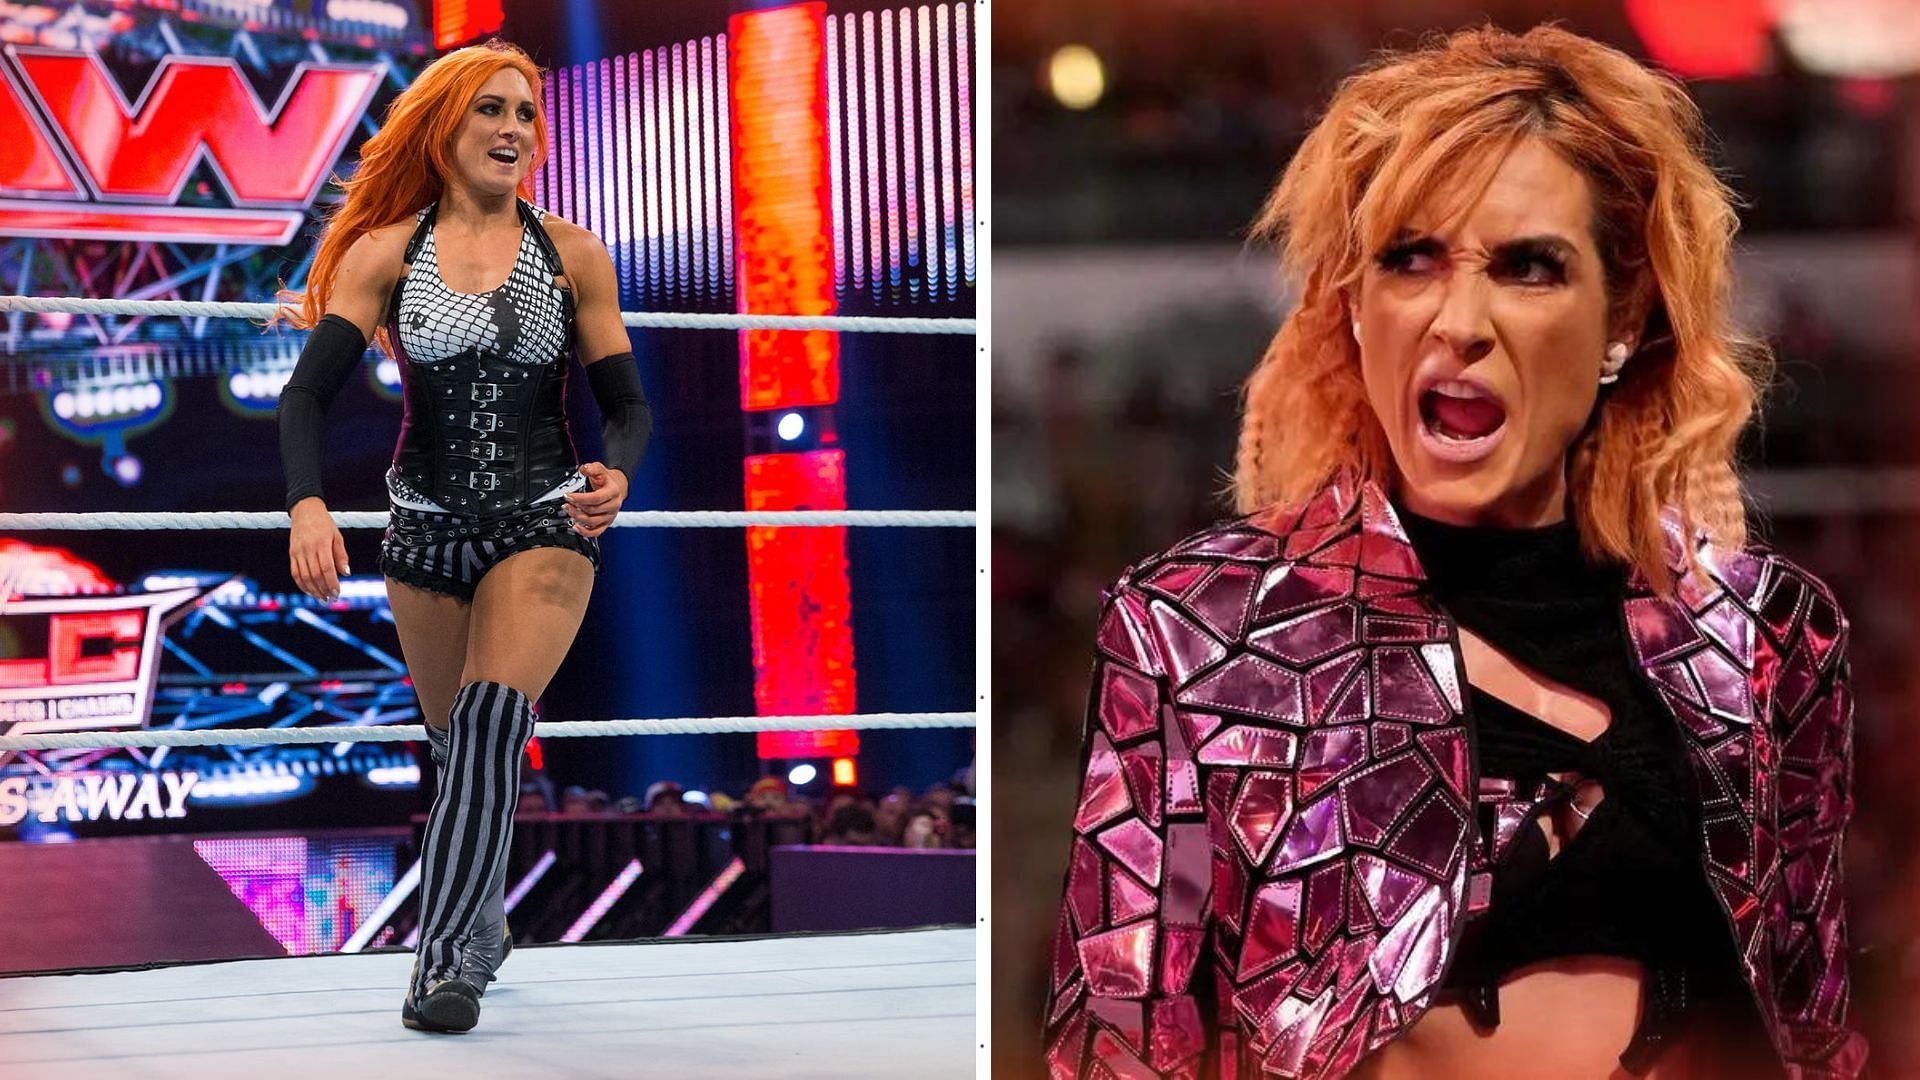 Becky Lynch has climbed the ladder of success with hard work